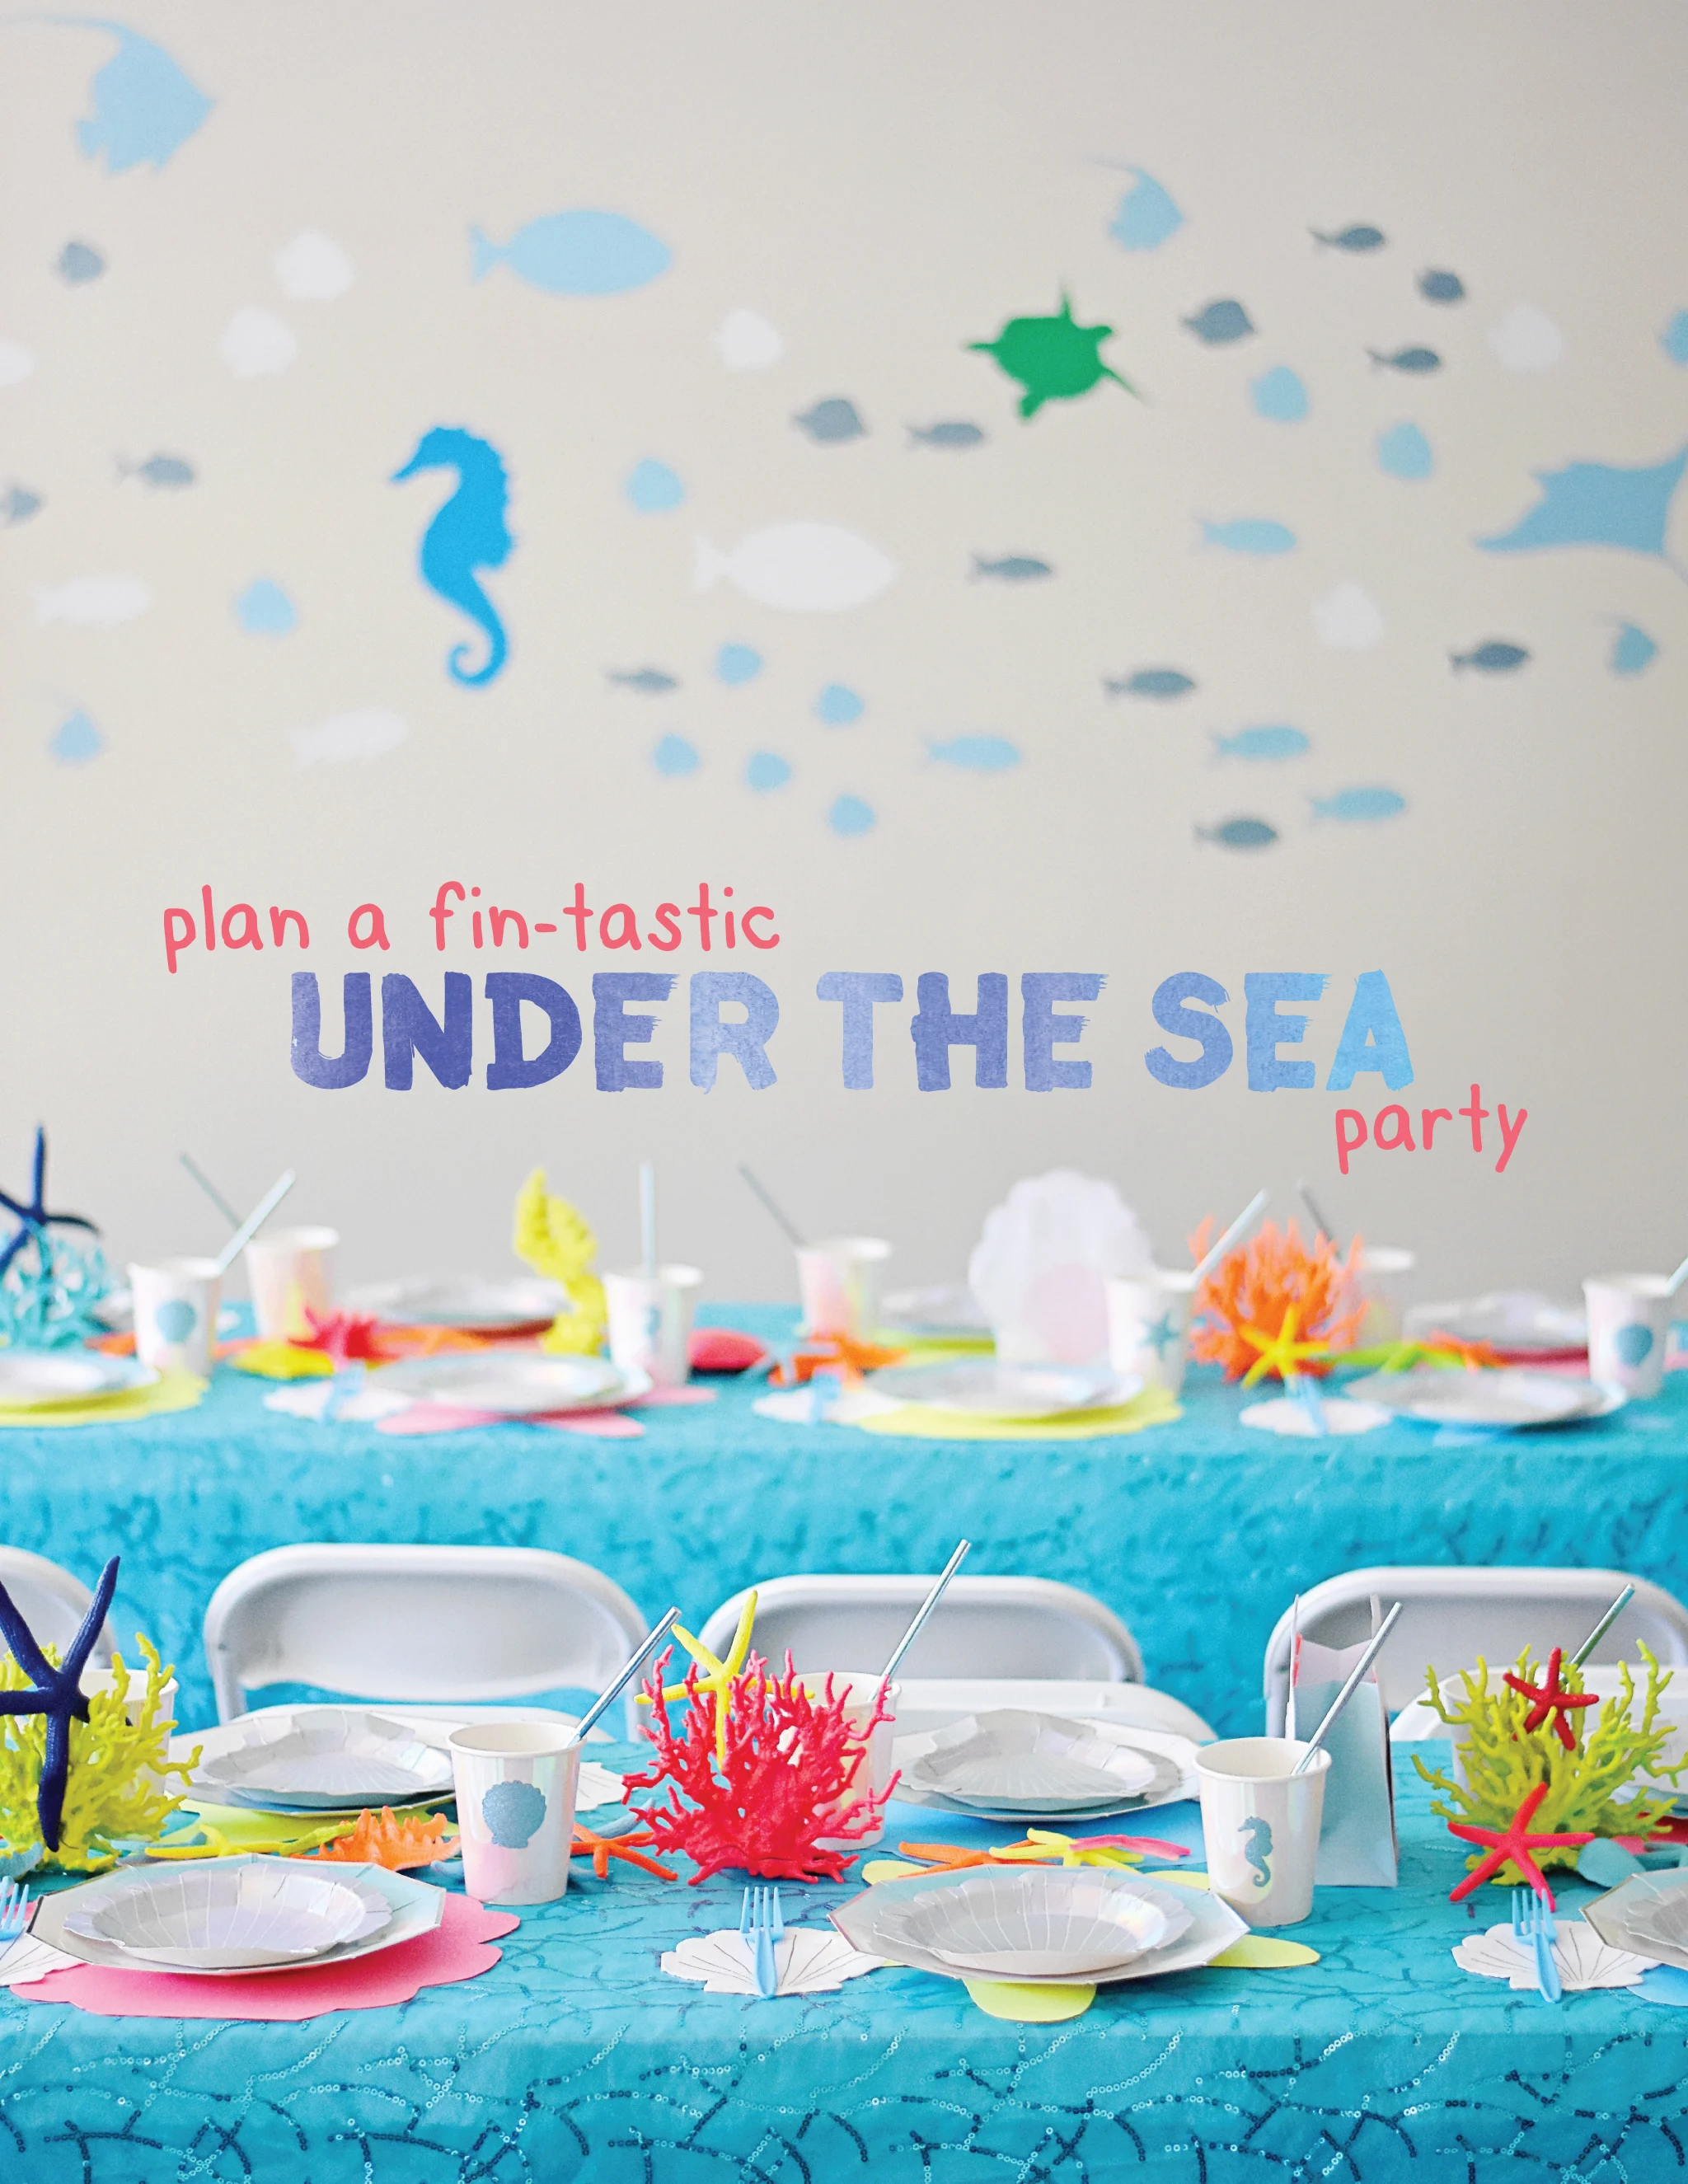 Plan a Fin-tastic Under the Sea Party! - Project Nursery